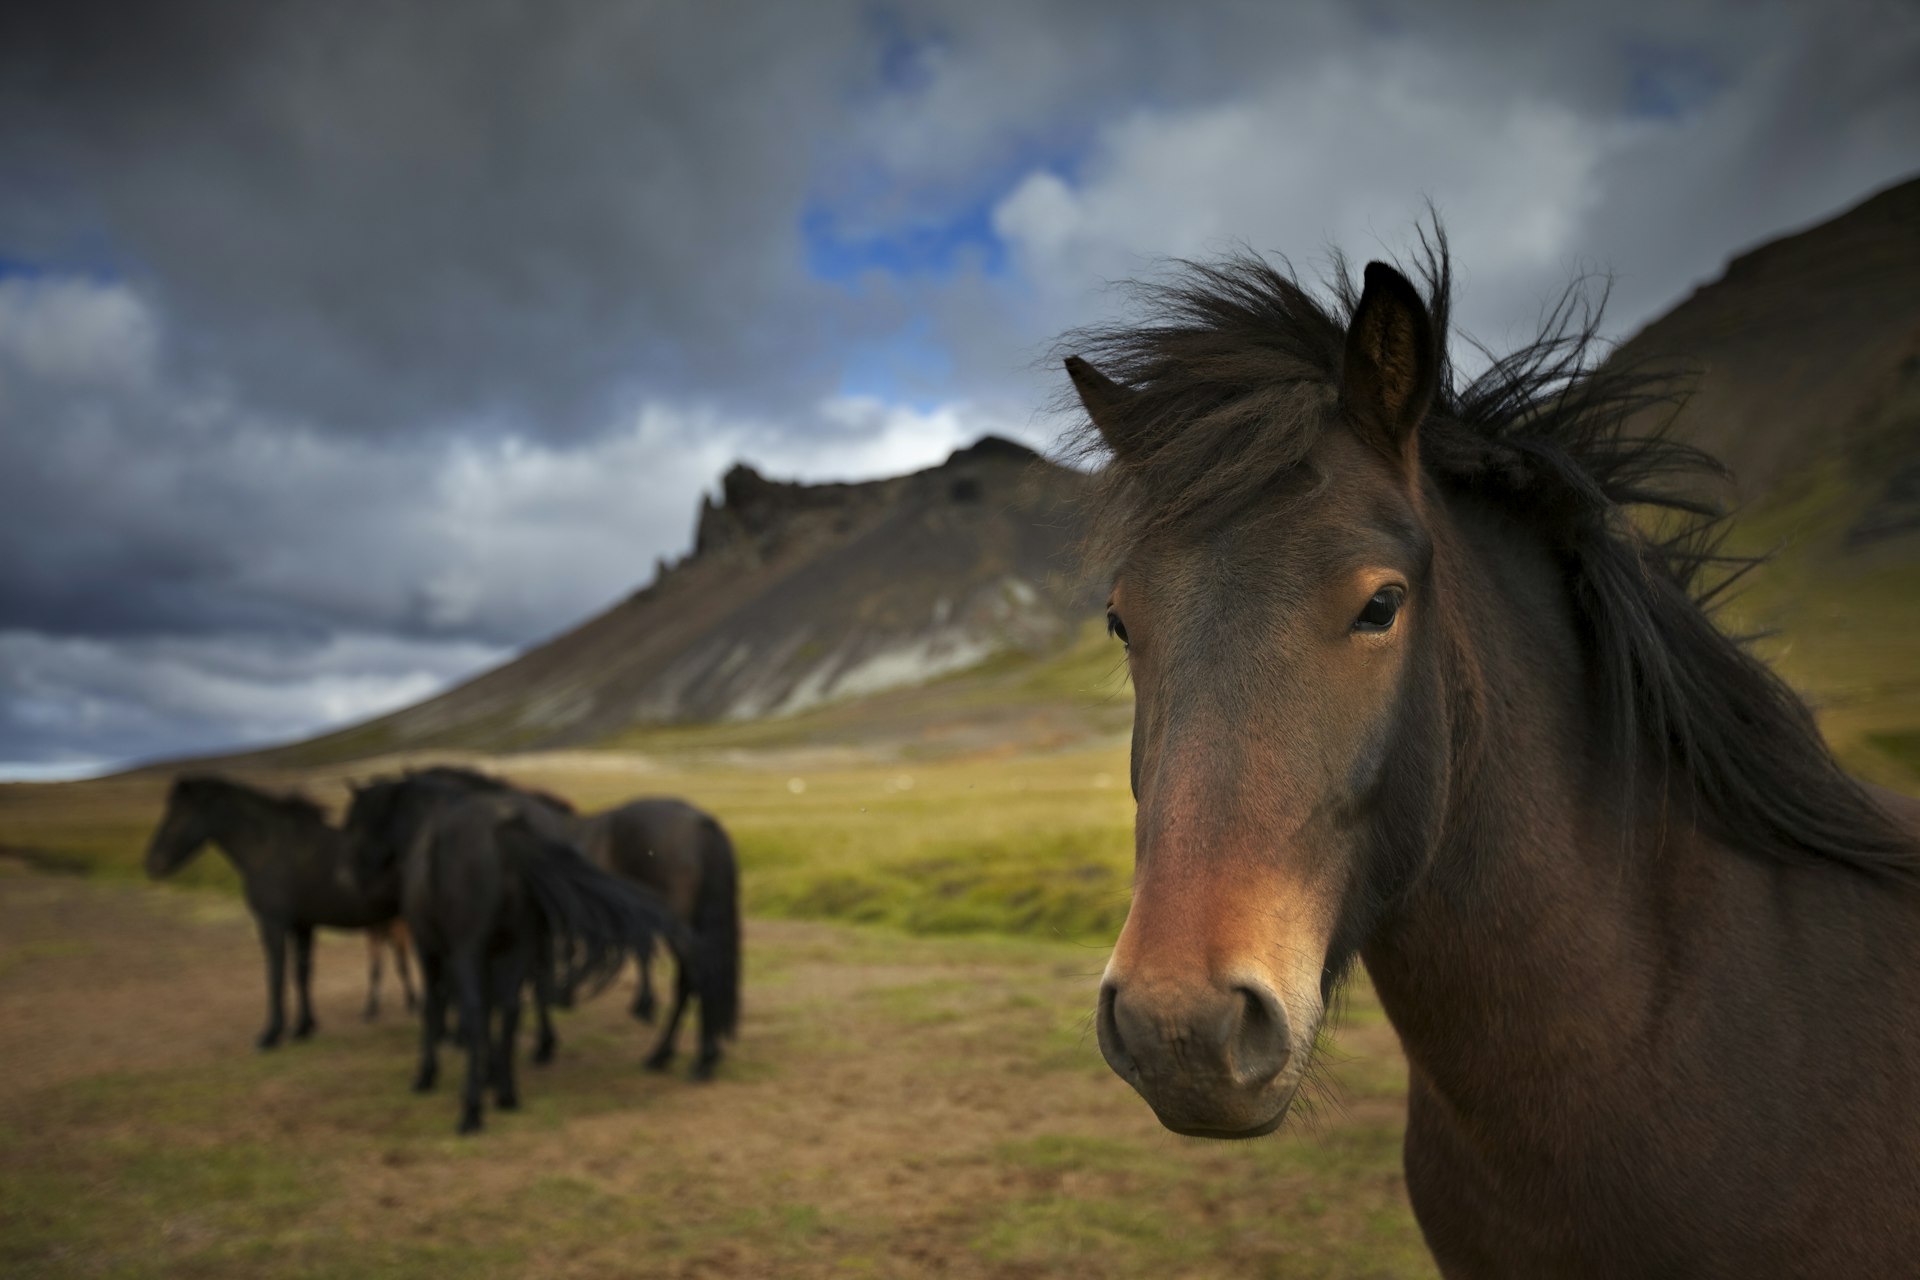 A wild horse looks into the camera with mountains in the background